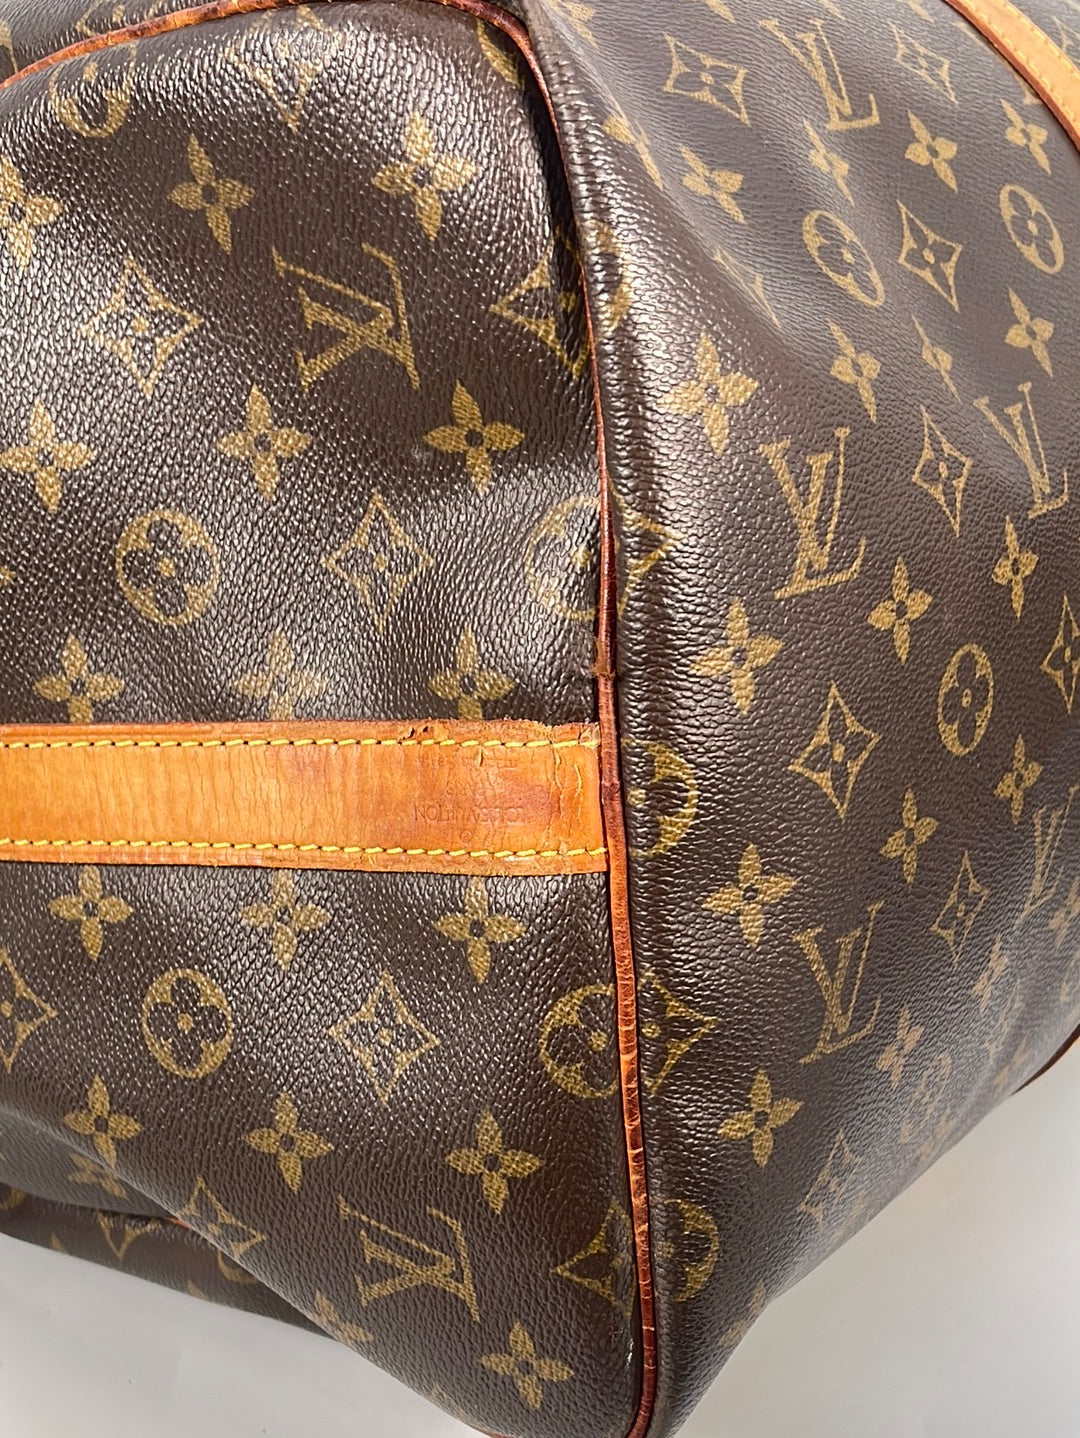 Pre-Owned Louis Vuitton Keepall 55 - 20909327